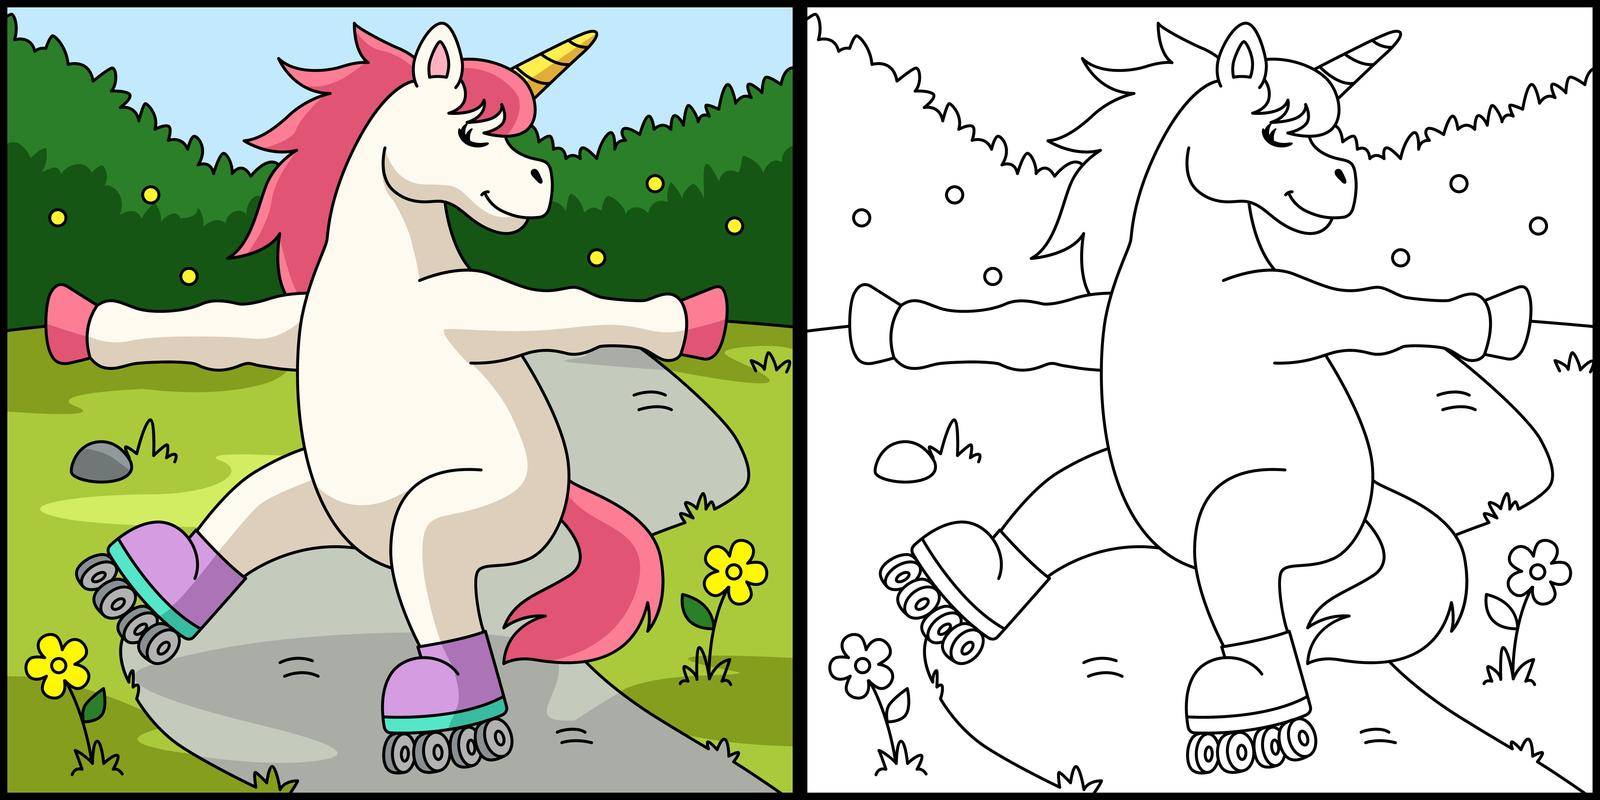 This coloring page shows a unicorn roller skating. One side of this illustration is colored and serves as an inspiration for children.